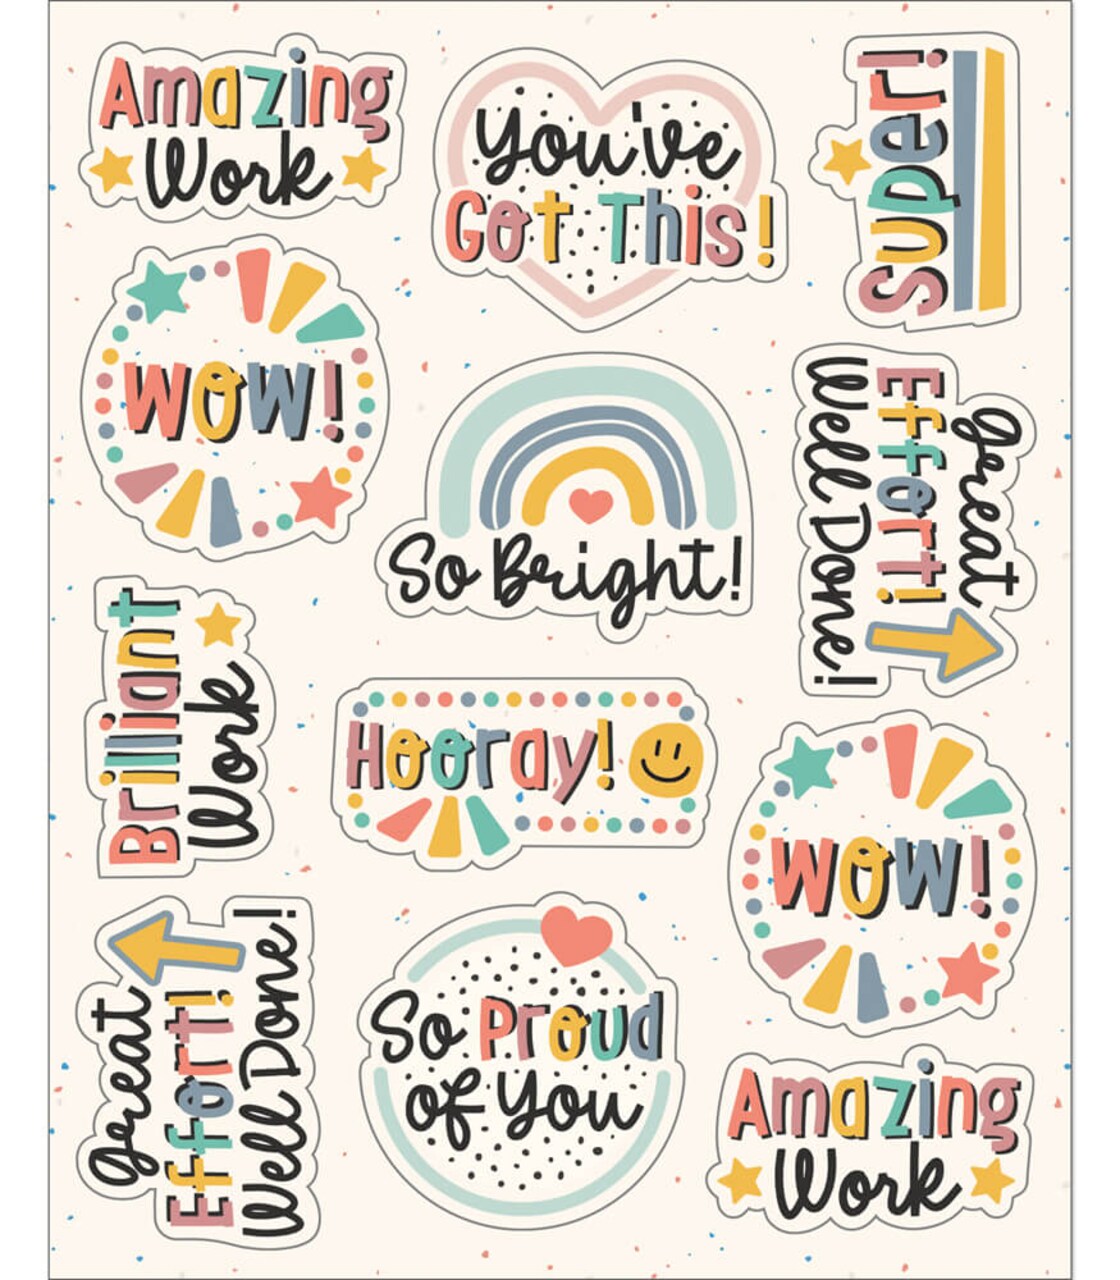 Carson Dellosa Motivational Sticker Packs, Inspirational Stickers for  School Supplies, Reward Stickers, Incentive Chart, and Classroom Prizes,  Positive Affirmation Stickers (6 Sheets)